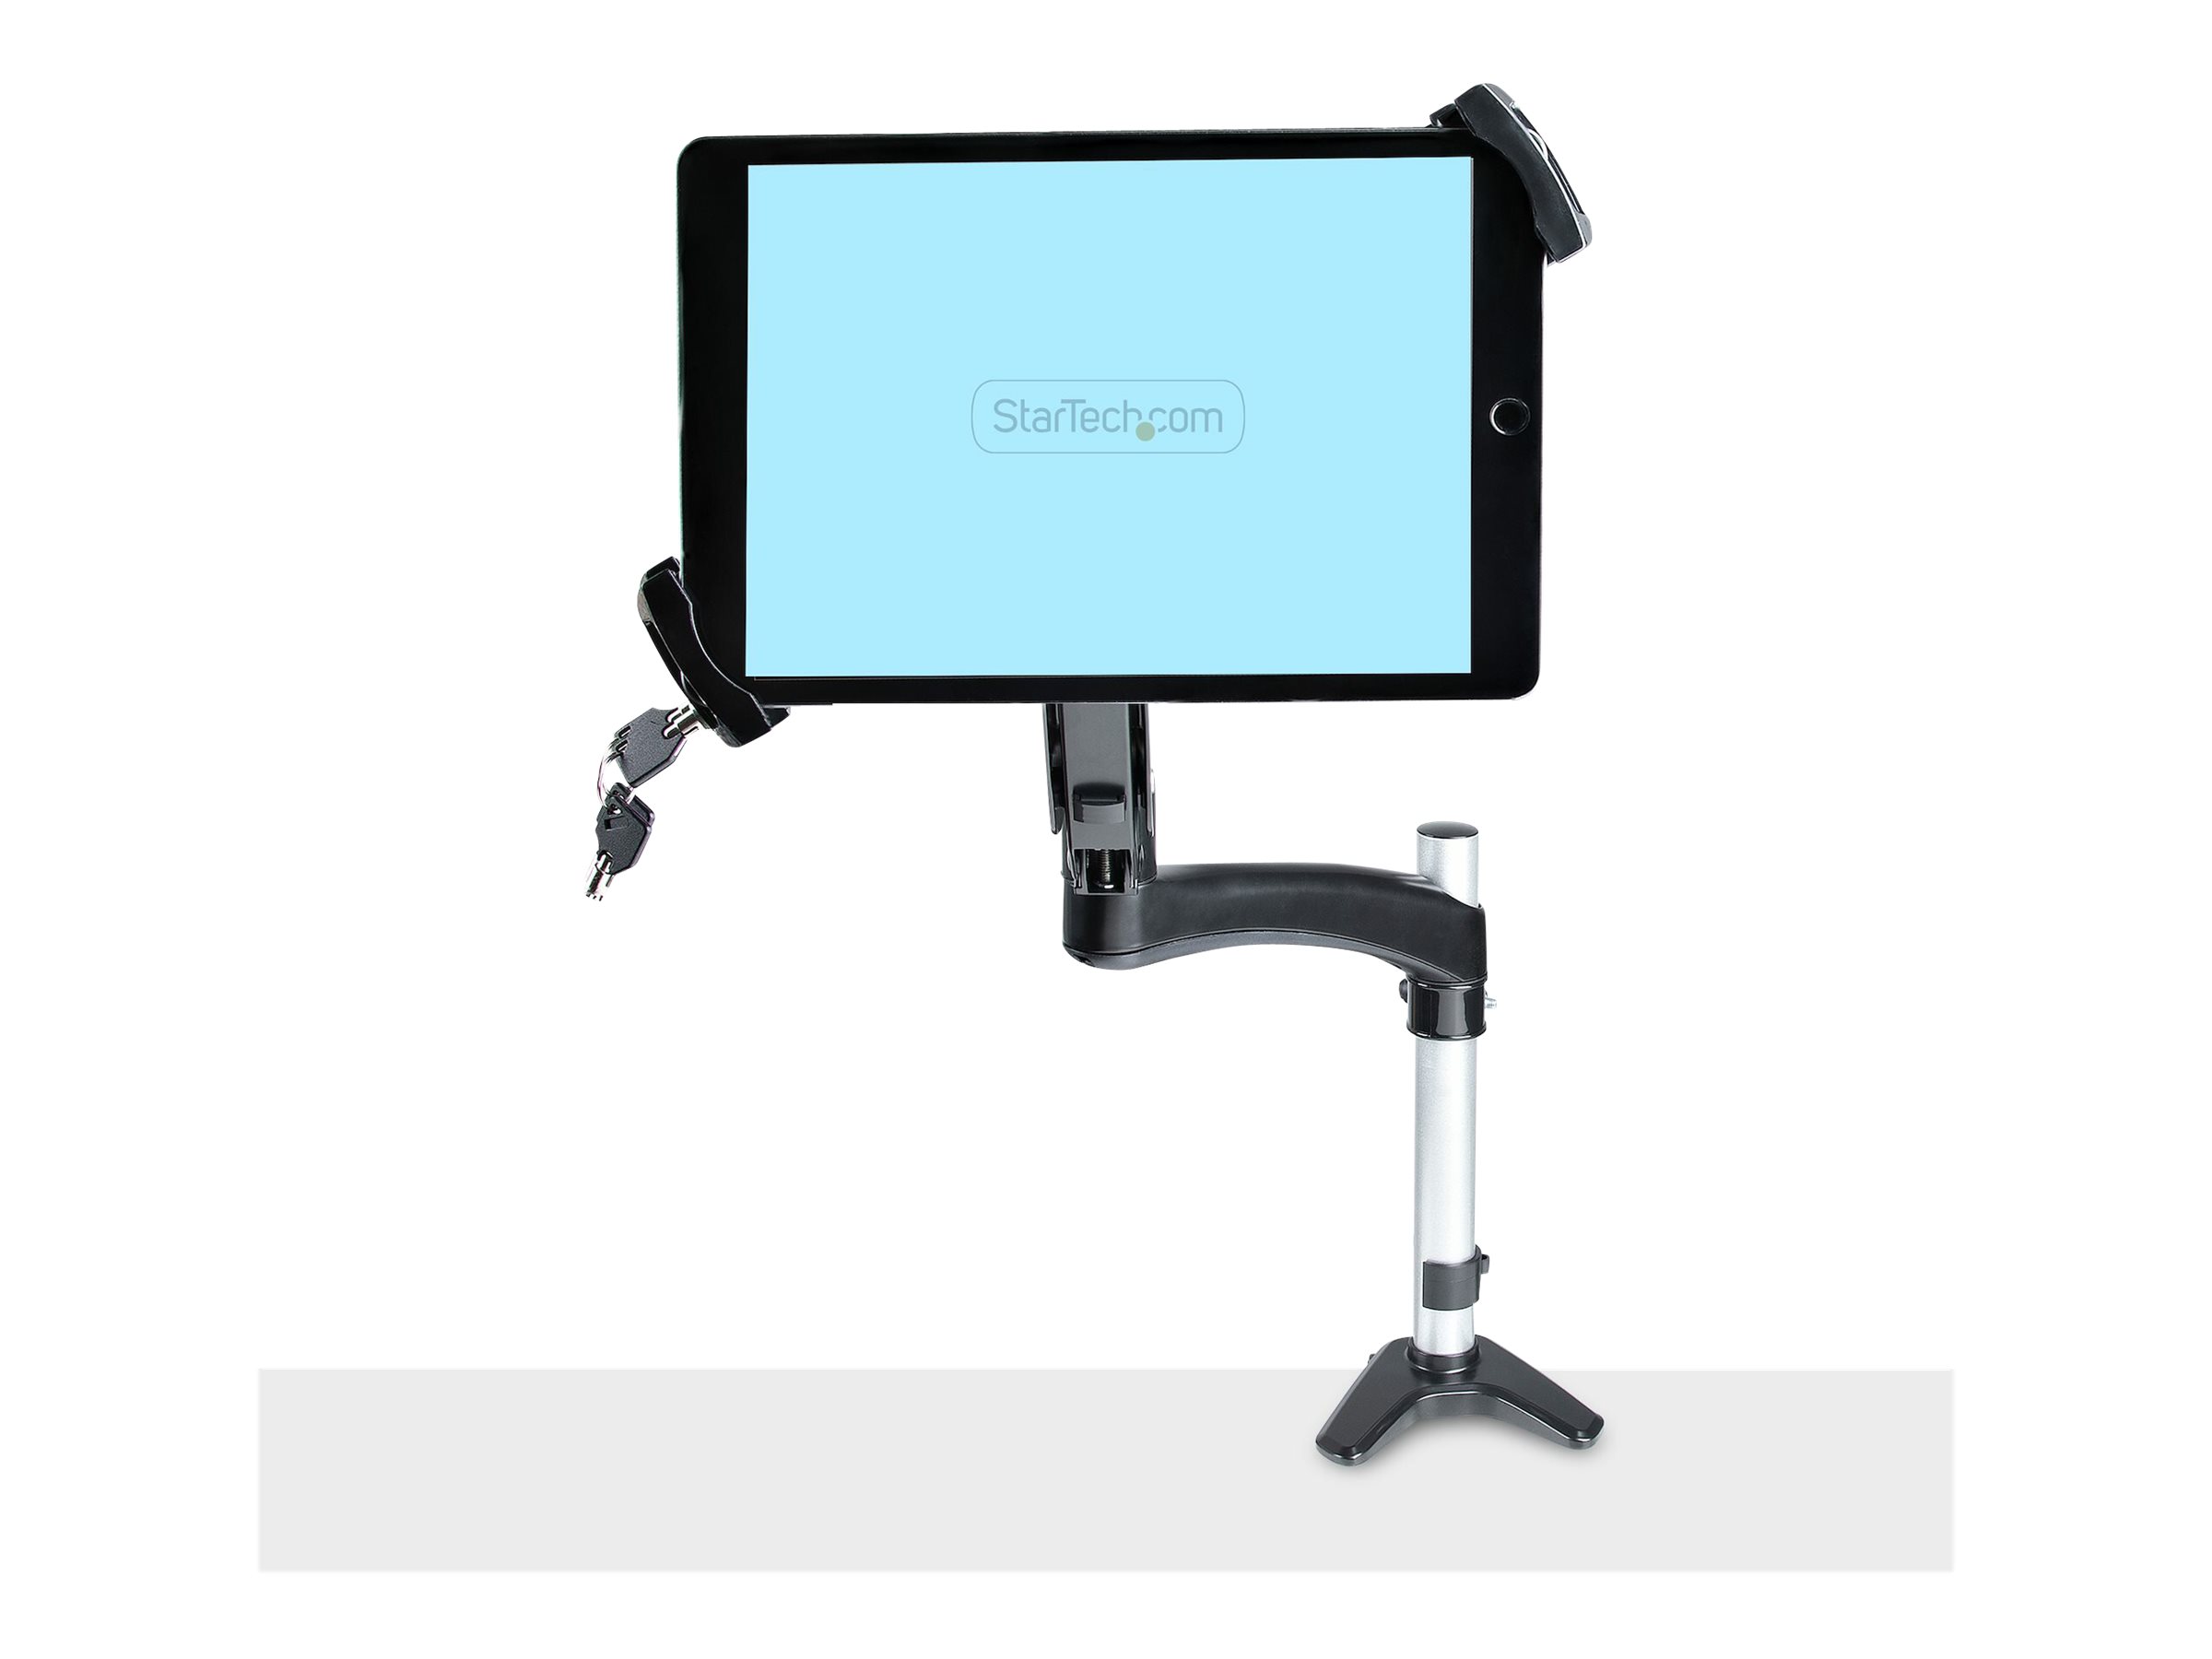 StarTech.com VESA Mount Adapter for Tablets 7.9 to 12.5in - Up to 2kg (4.4lb) - 75x75/100x100 VESA Patterns - Universal Anti-Theft Tablet VESA Mount Clamp - Secure Tablet Mount - Black